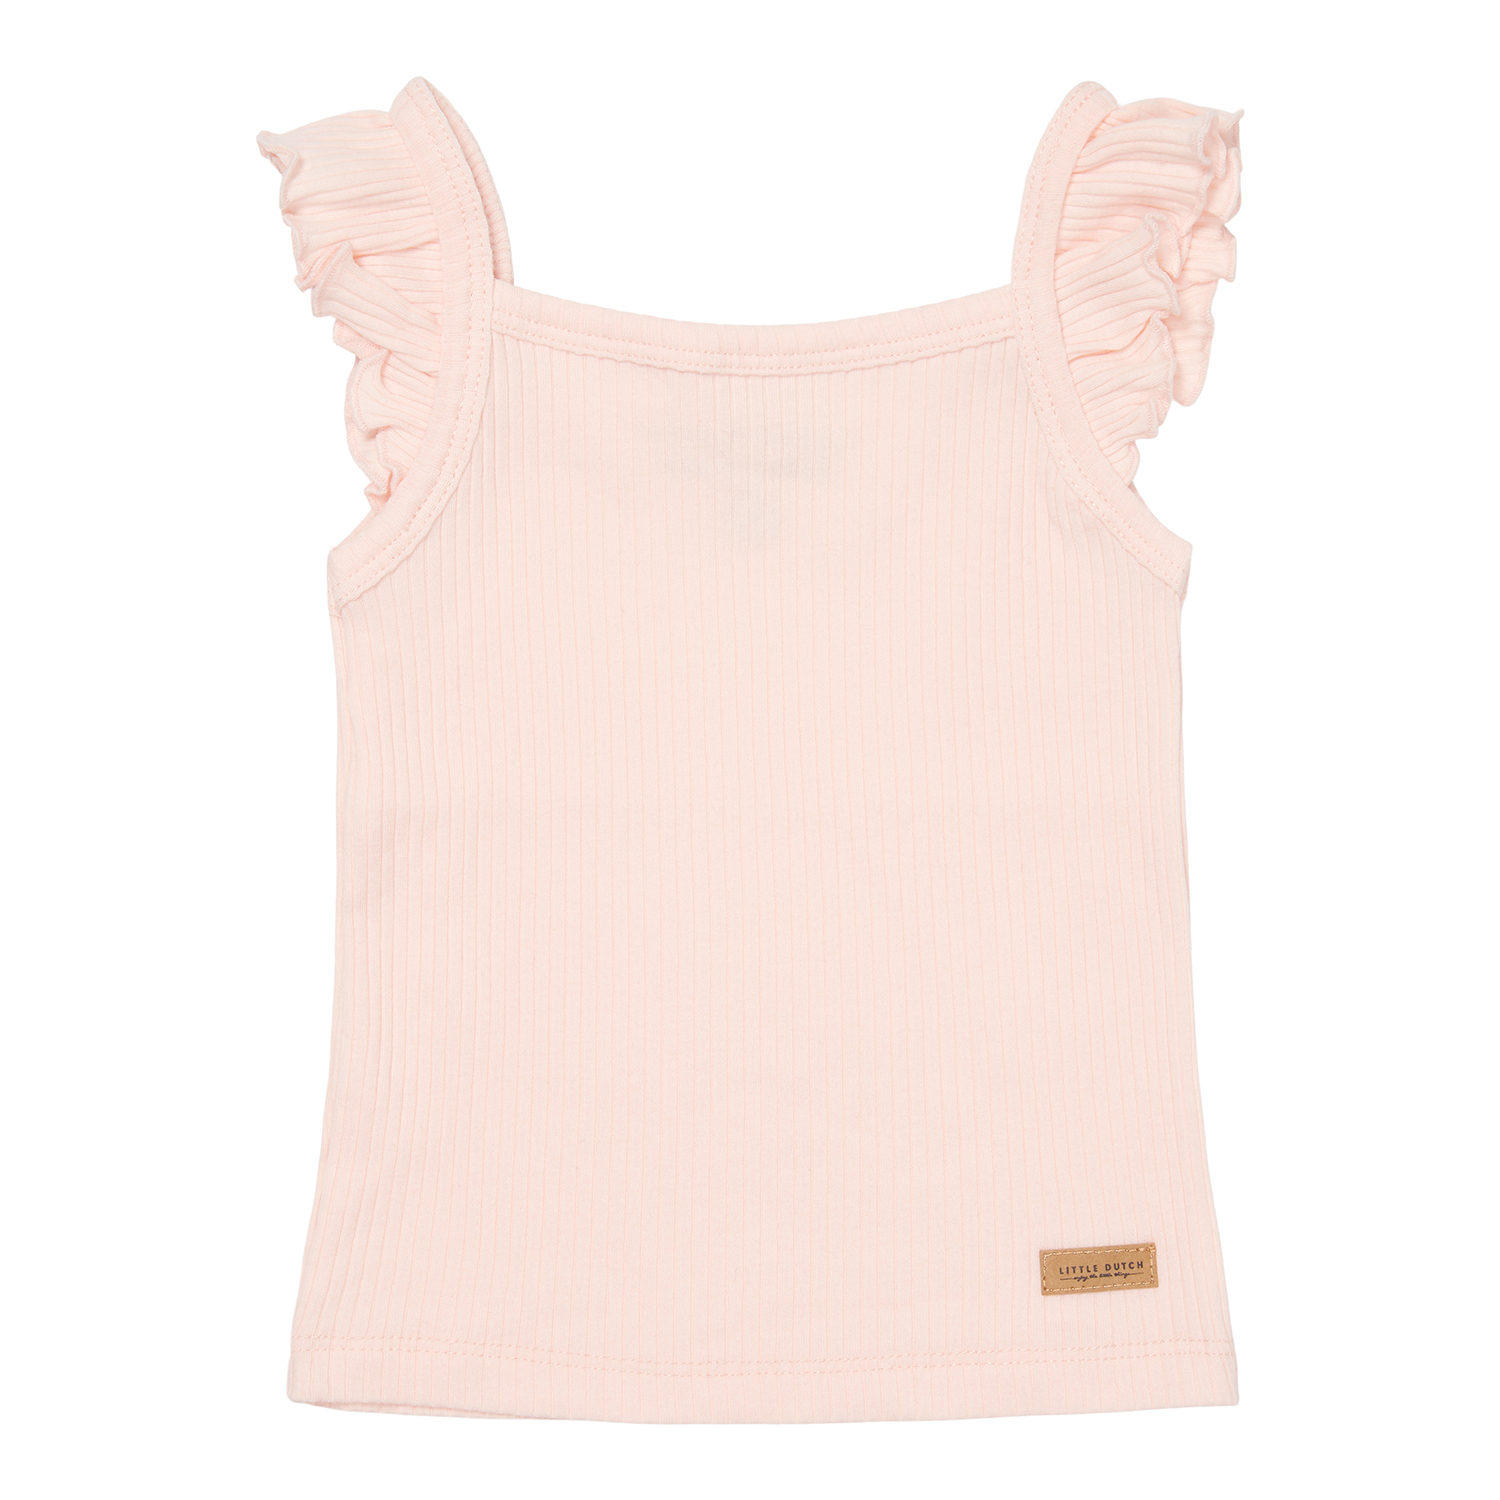 Top mit Volants Rippe Pure soft pink (Gr. 62)